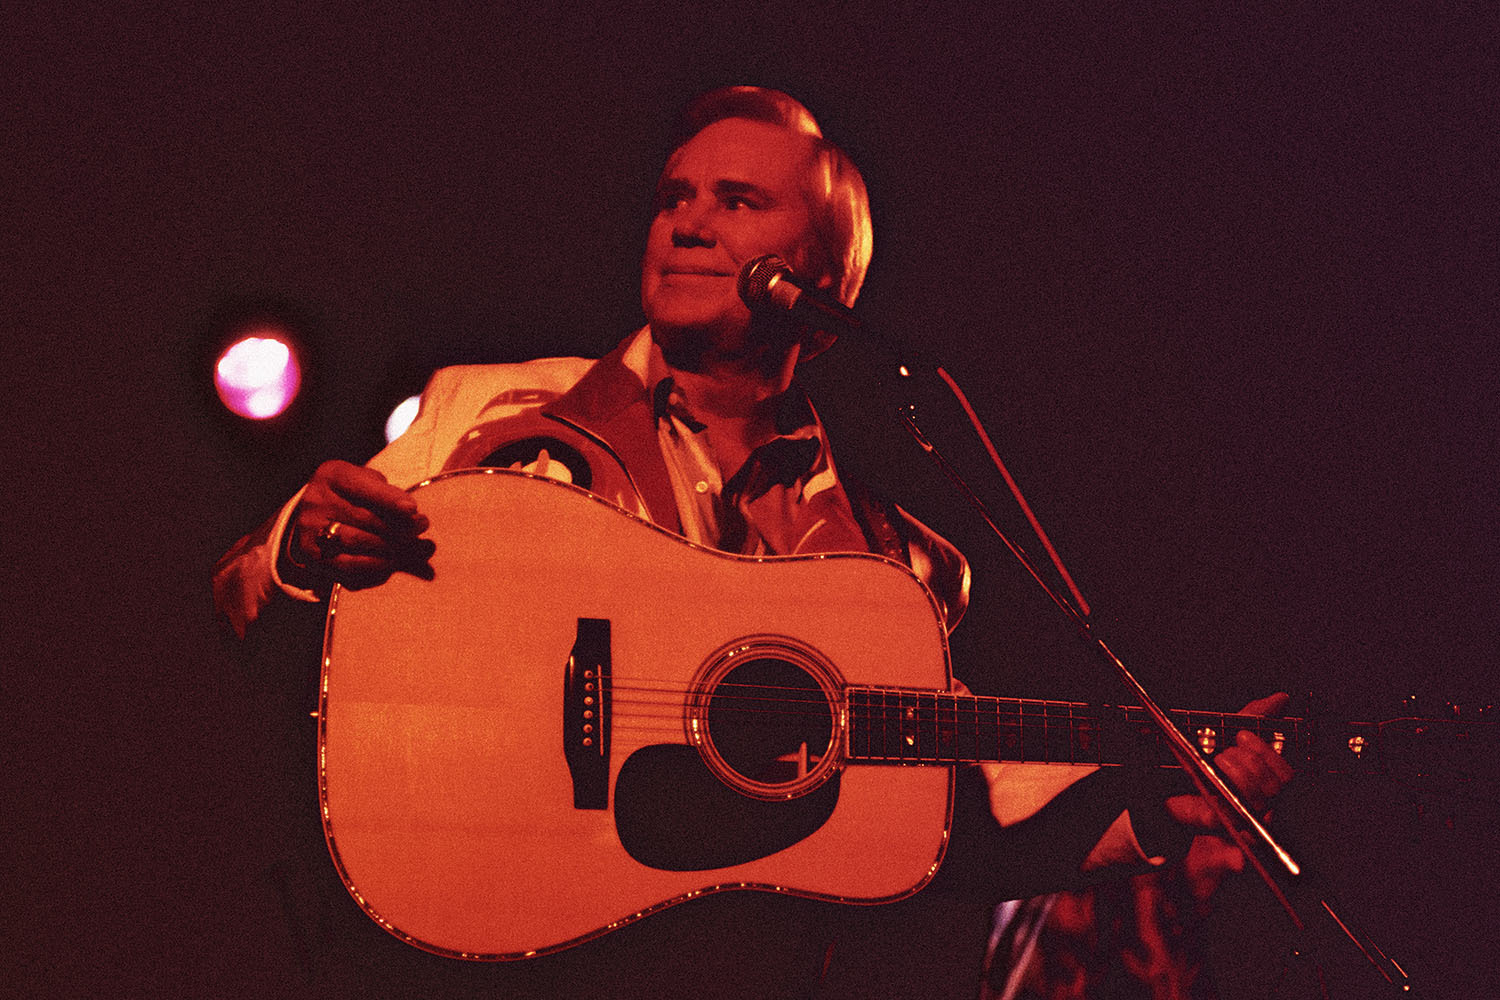 American country music star George Jones (1931-2013) performs at Tramps, New York, New York, Thursday, November 12, 1992.